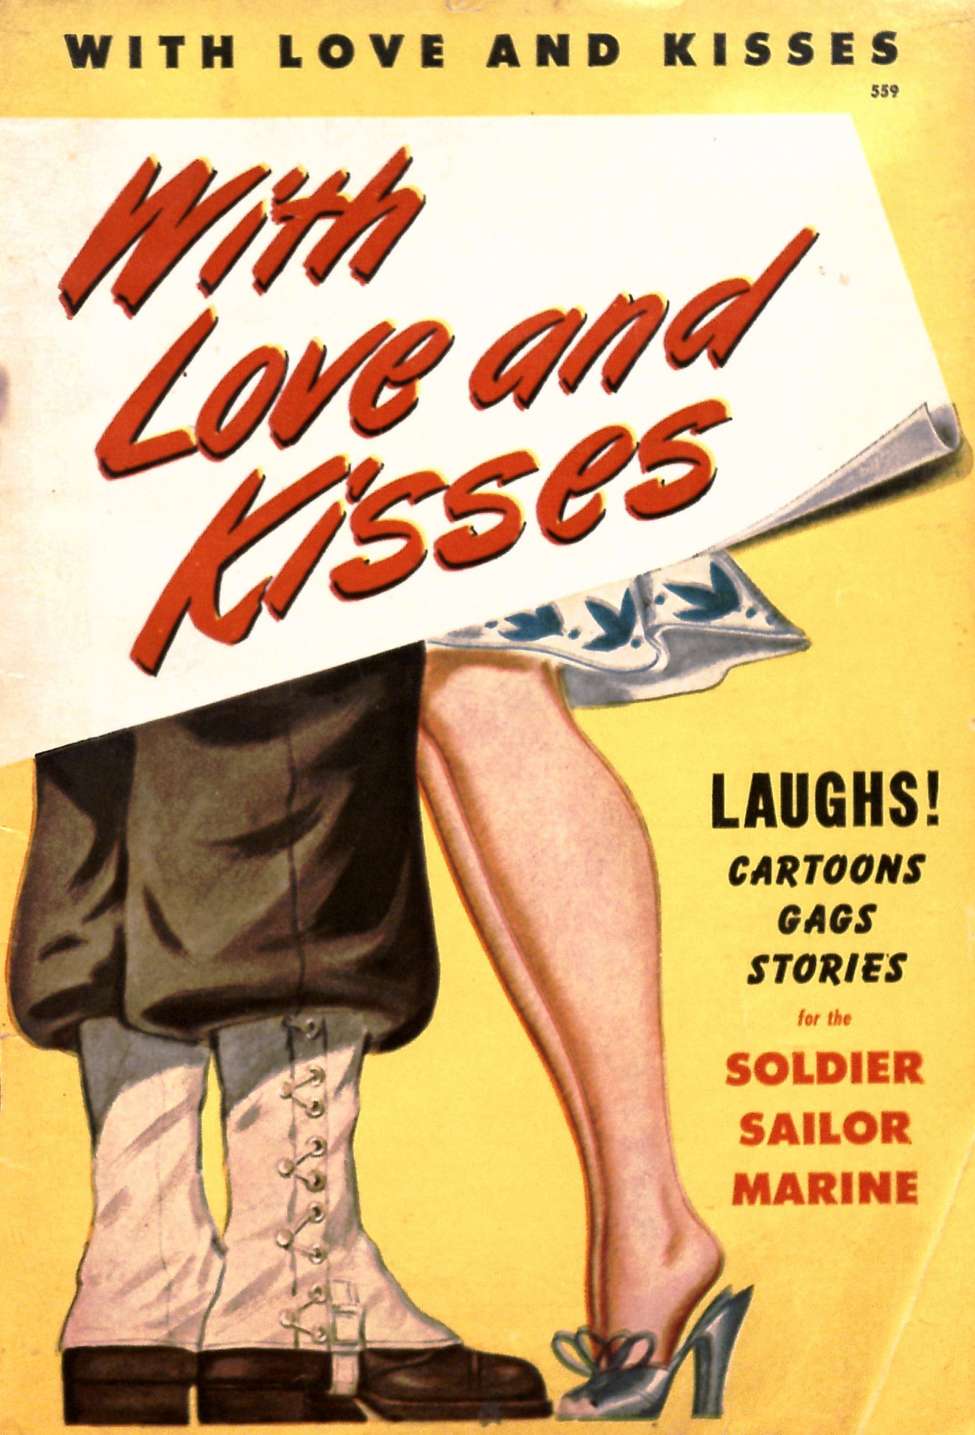 Book Cover For Best Books 559 - With Love and Kisses